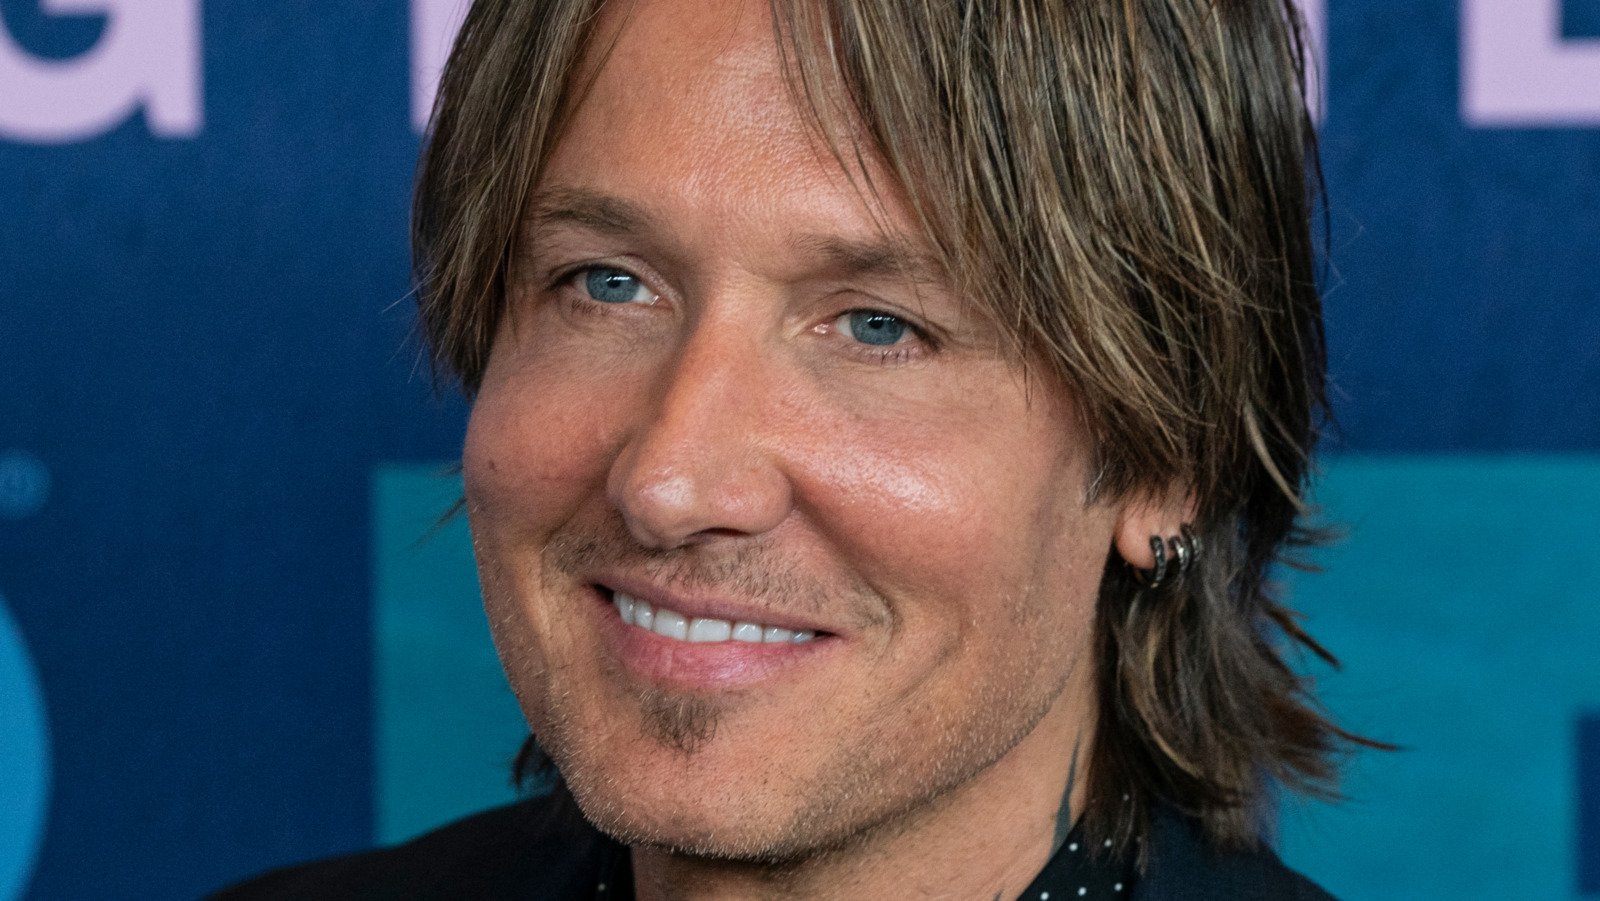 What Really Happened To Keith Urban's Face?